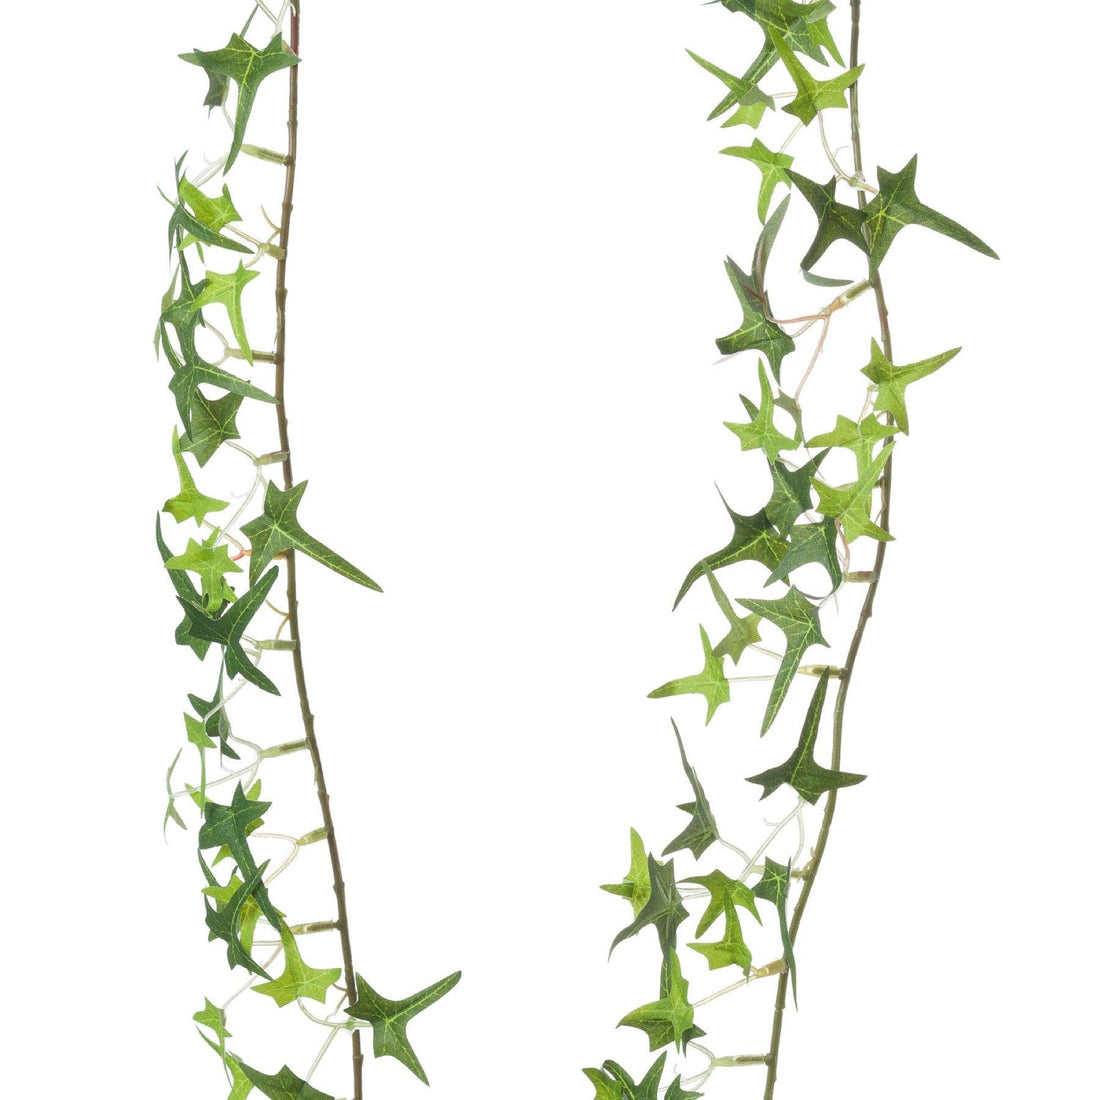 Small Ivy Garland - £19.95 - Gifts & Accessories > Christmas Decorations > Christmas Wreaths & Garlands 